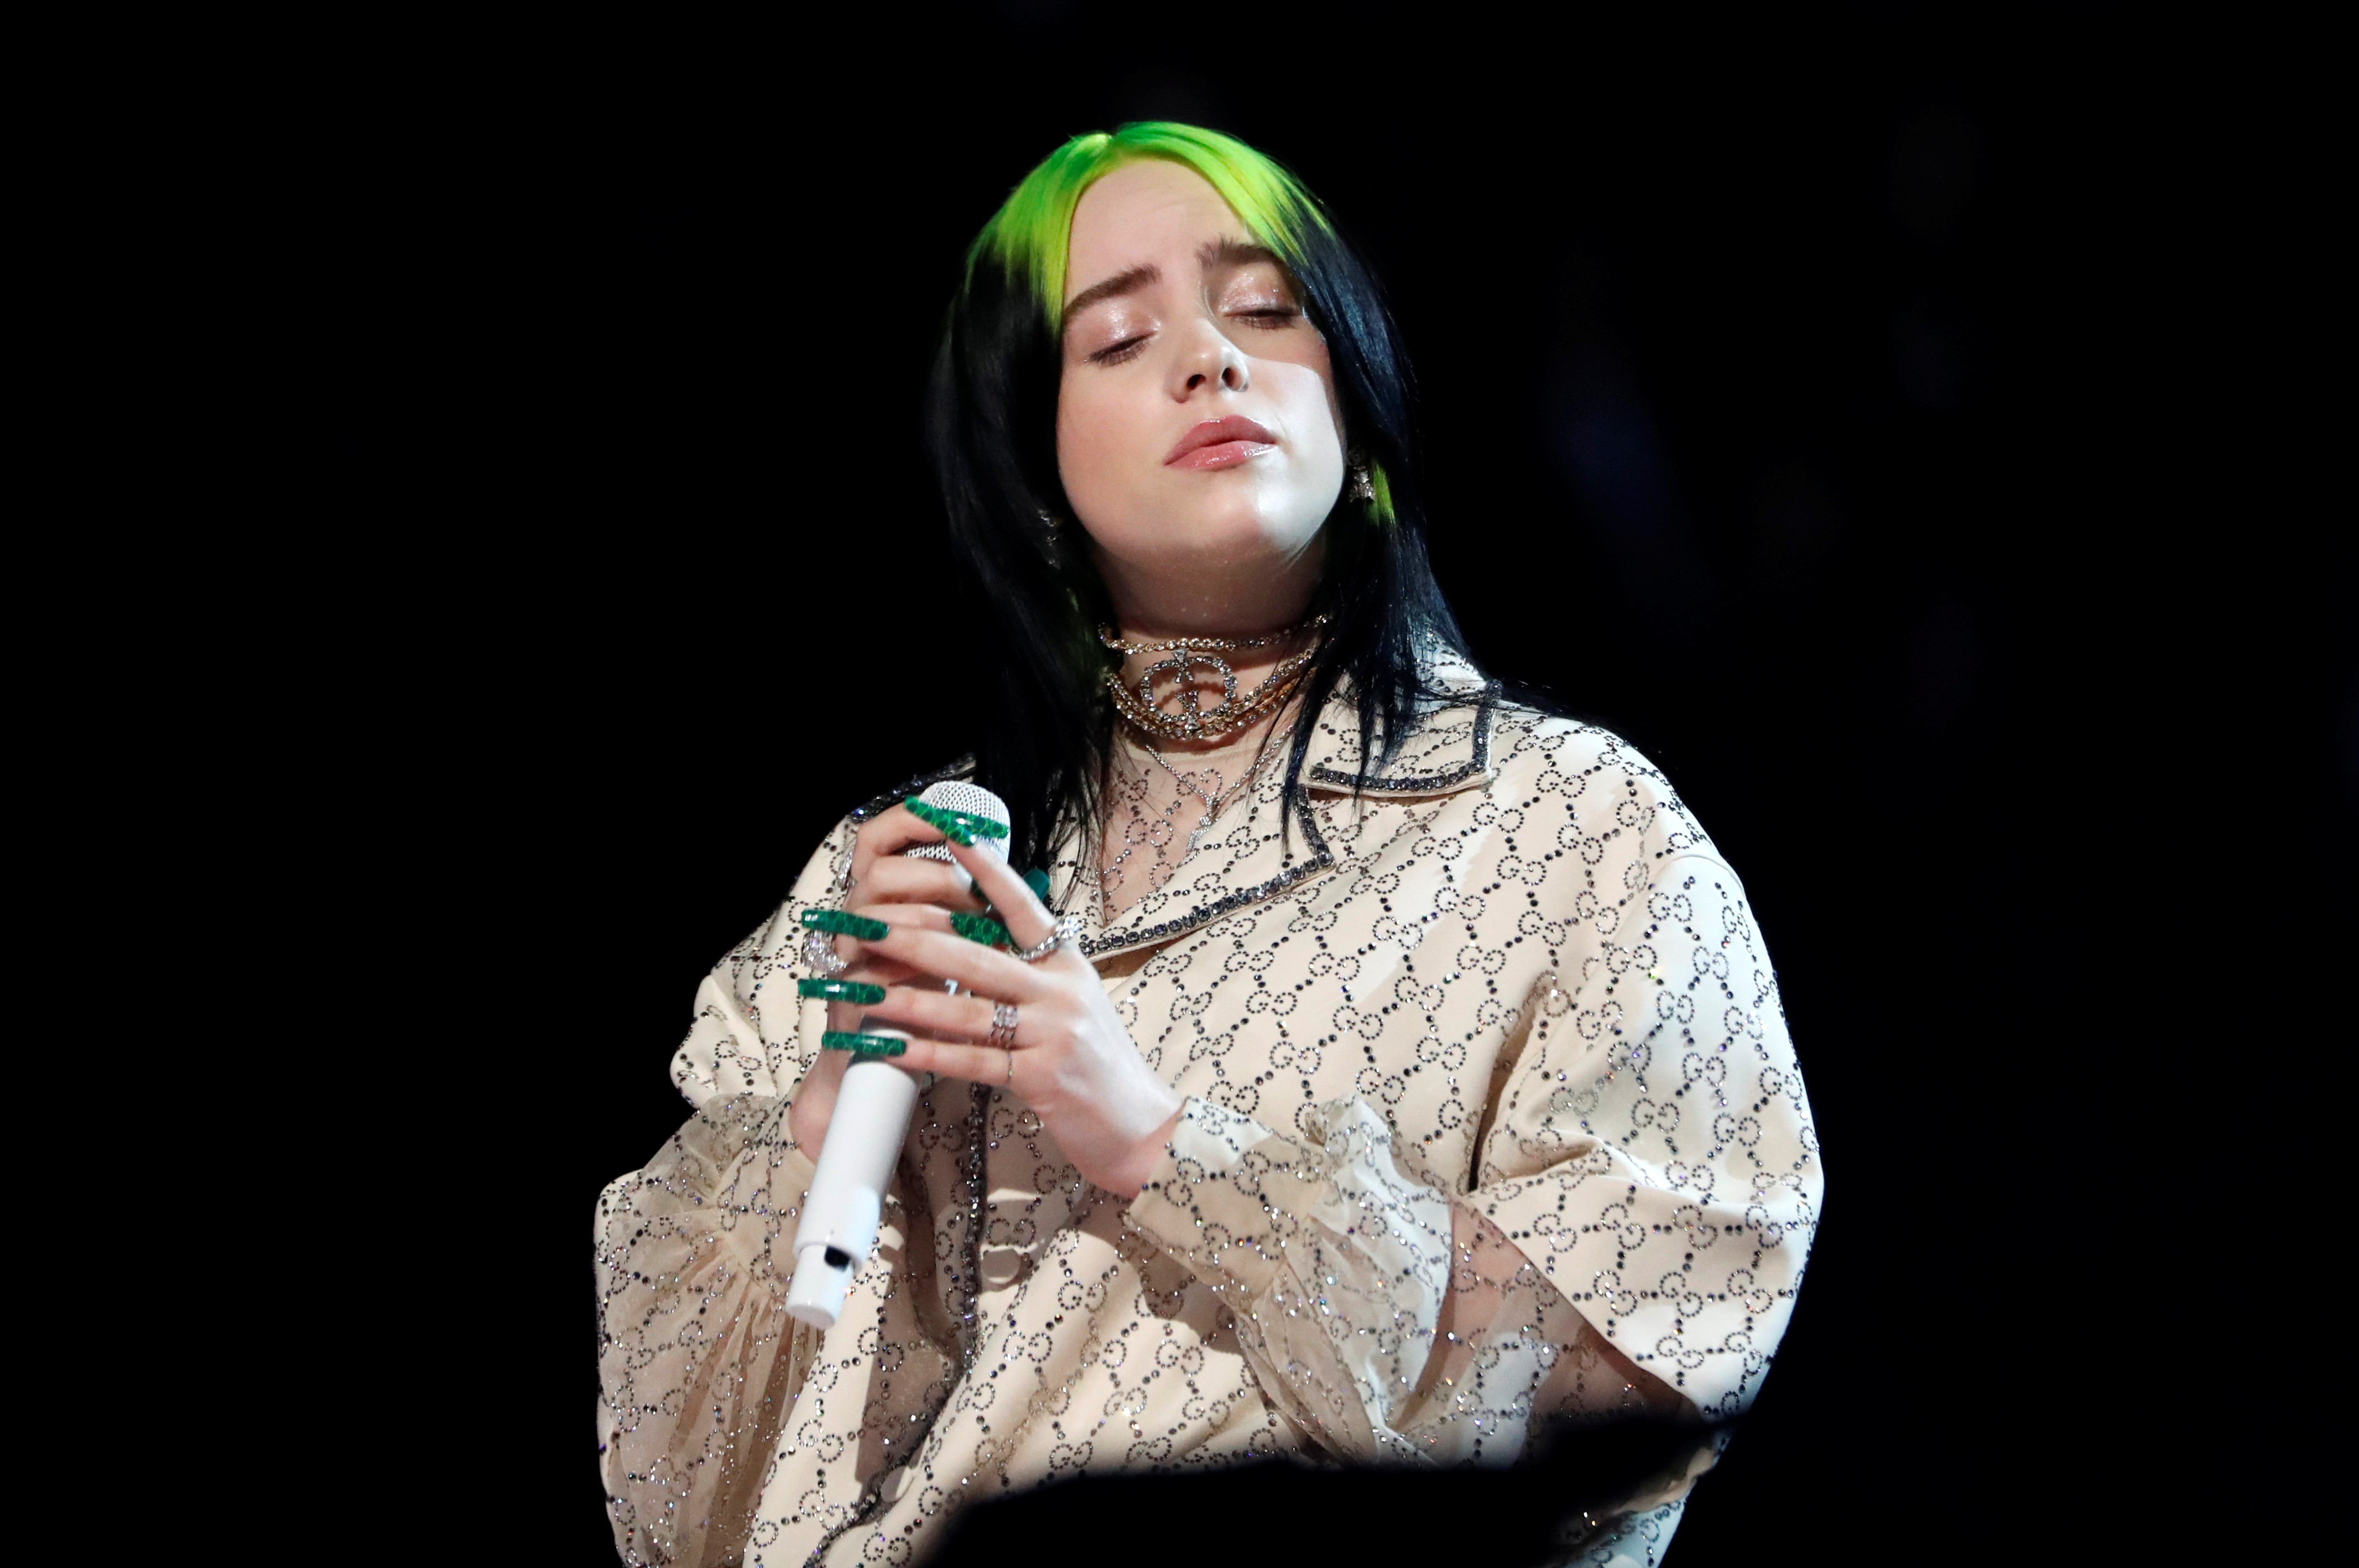 Billie Eilish, who performed at the 62nd Grammy Awards and at the 92nd Academy Awards, just released the latest James Bond theme song. Photo: Mario Anzuoni/Reuters